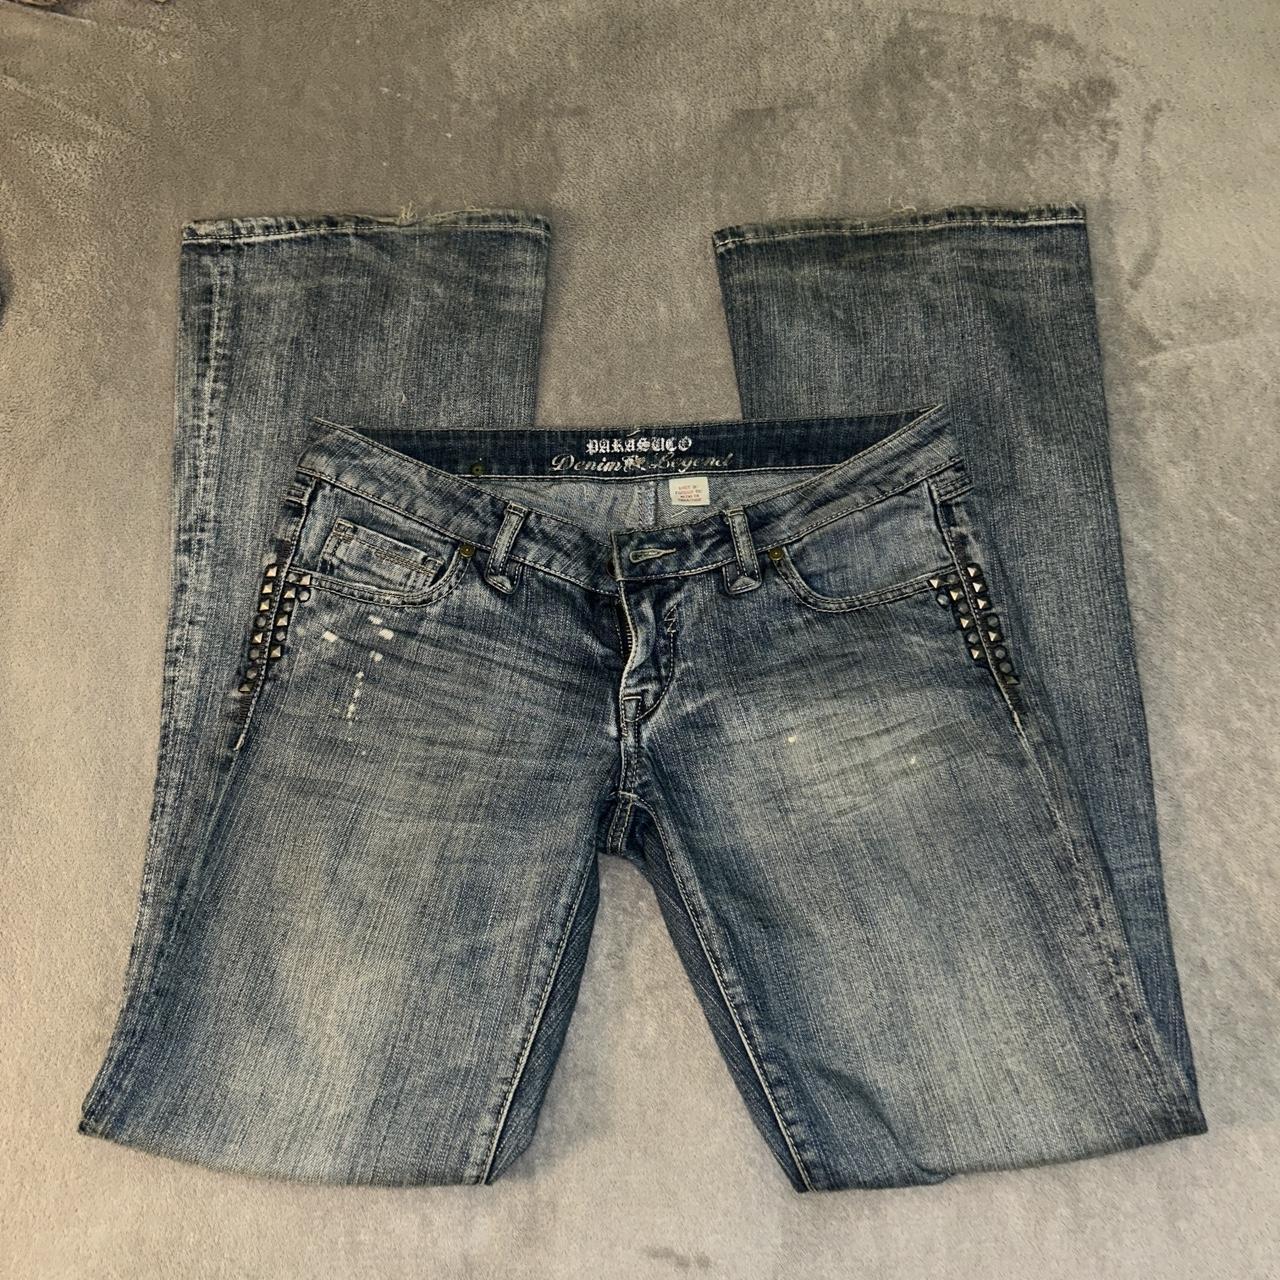 Distressed early 2000 low waisted jeans size 29 - Depop